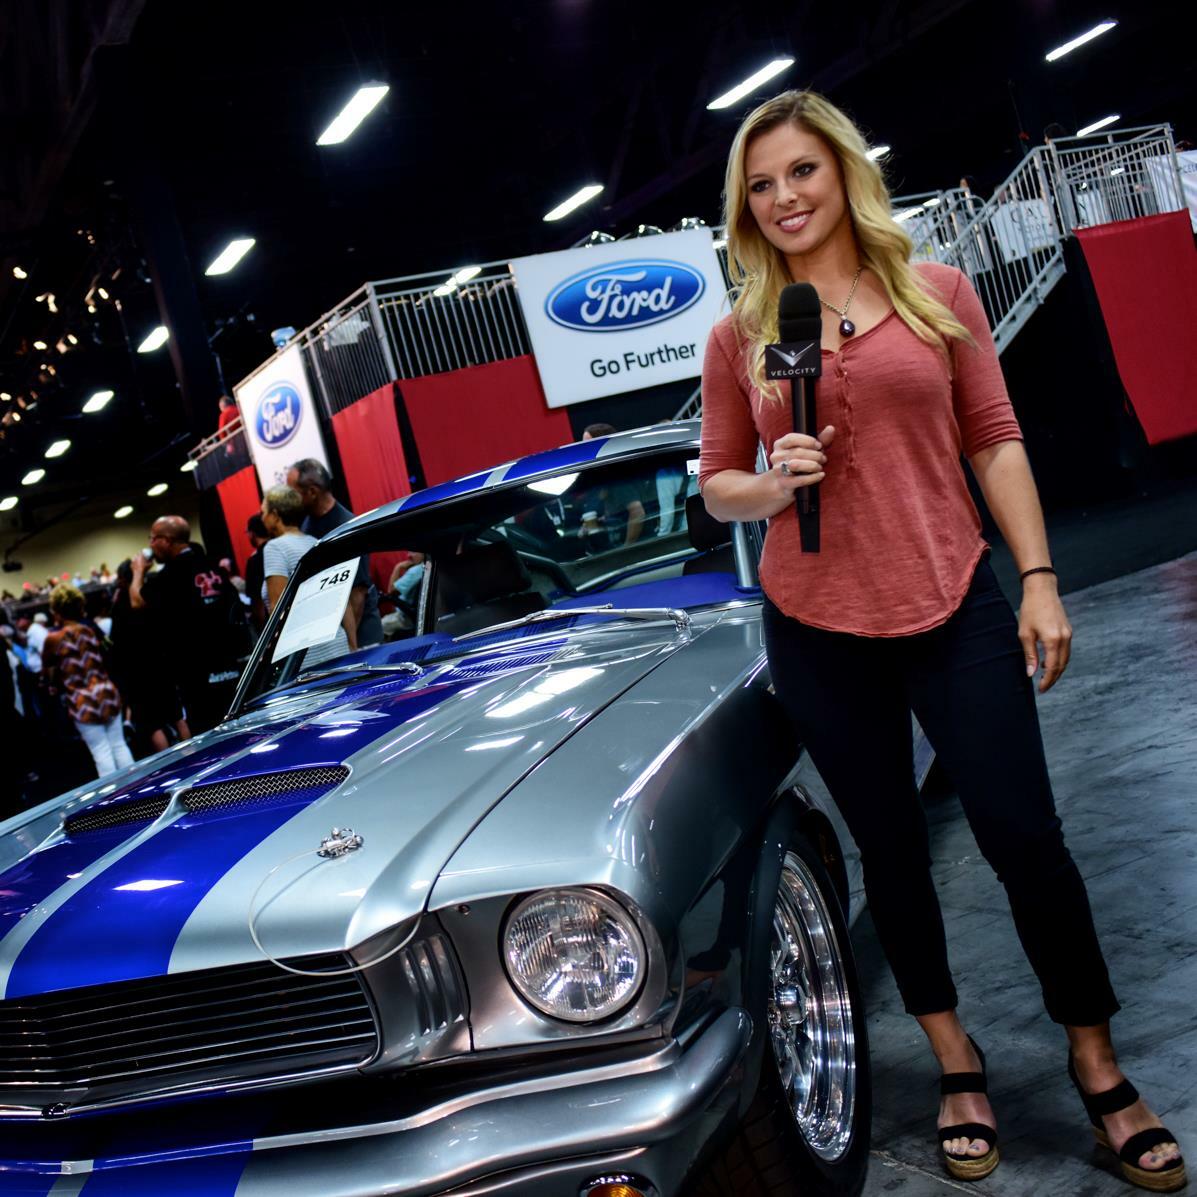 Cristy Lee from "All Girls Garage" is among the familiar faces providing behind-the-scenes coverage for Velocity and Discovery during the Barrett-Jackson auctions.